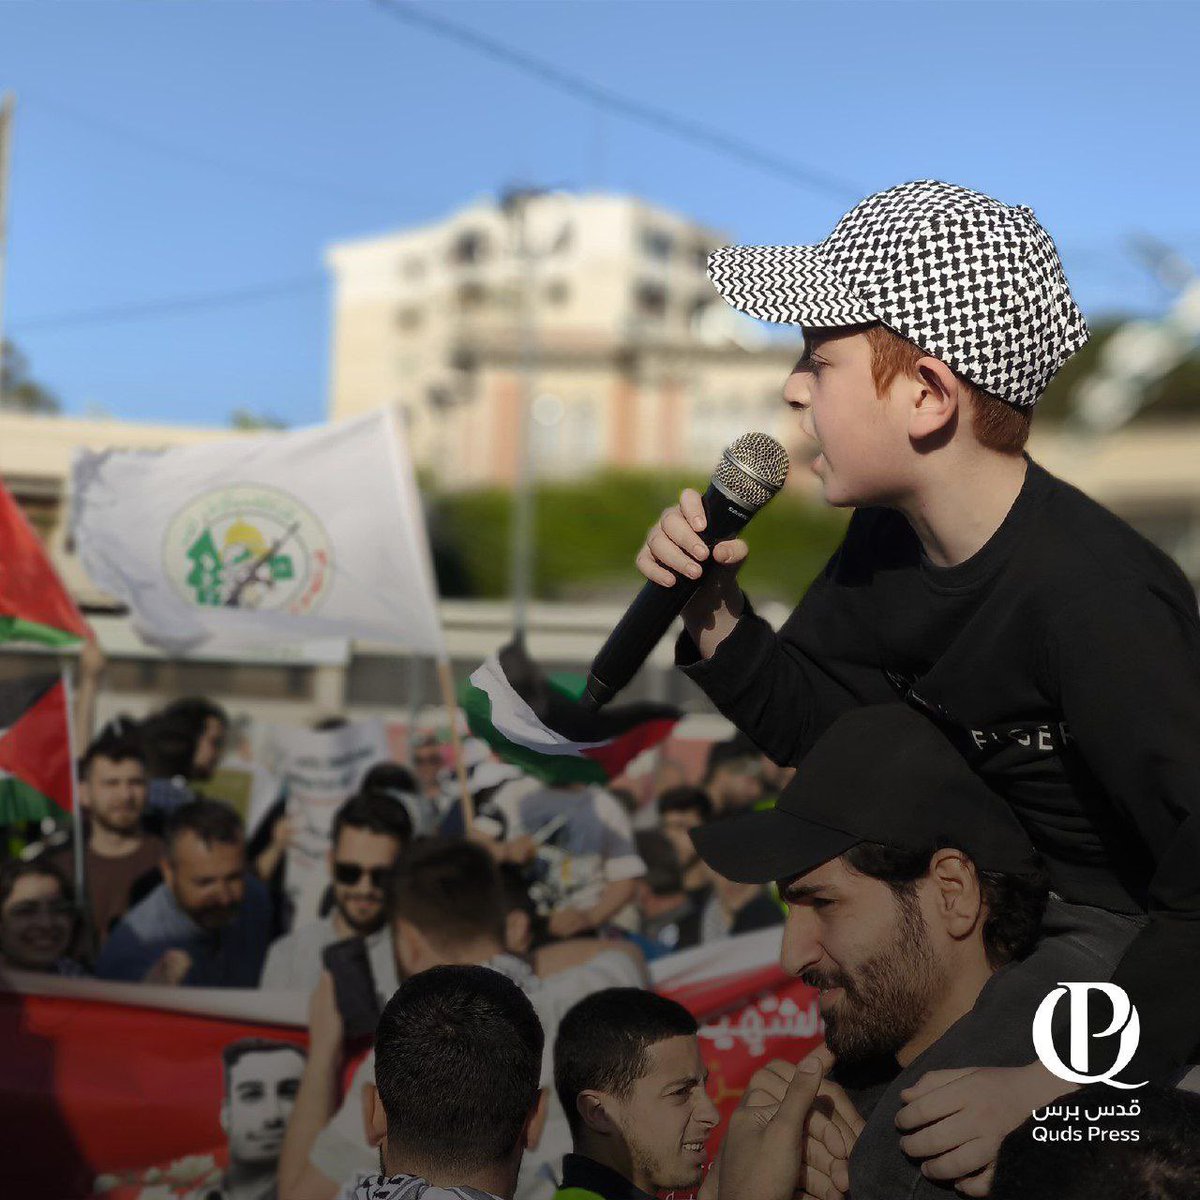 🇱🇧 A march in the city of Tripoli, northern Lebanon; In support of Gāza and the resistance and denouncing the occupation’s ongoing aggression. ✊🏽🇵🇸